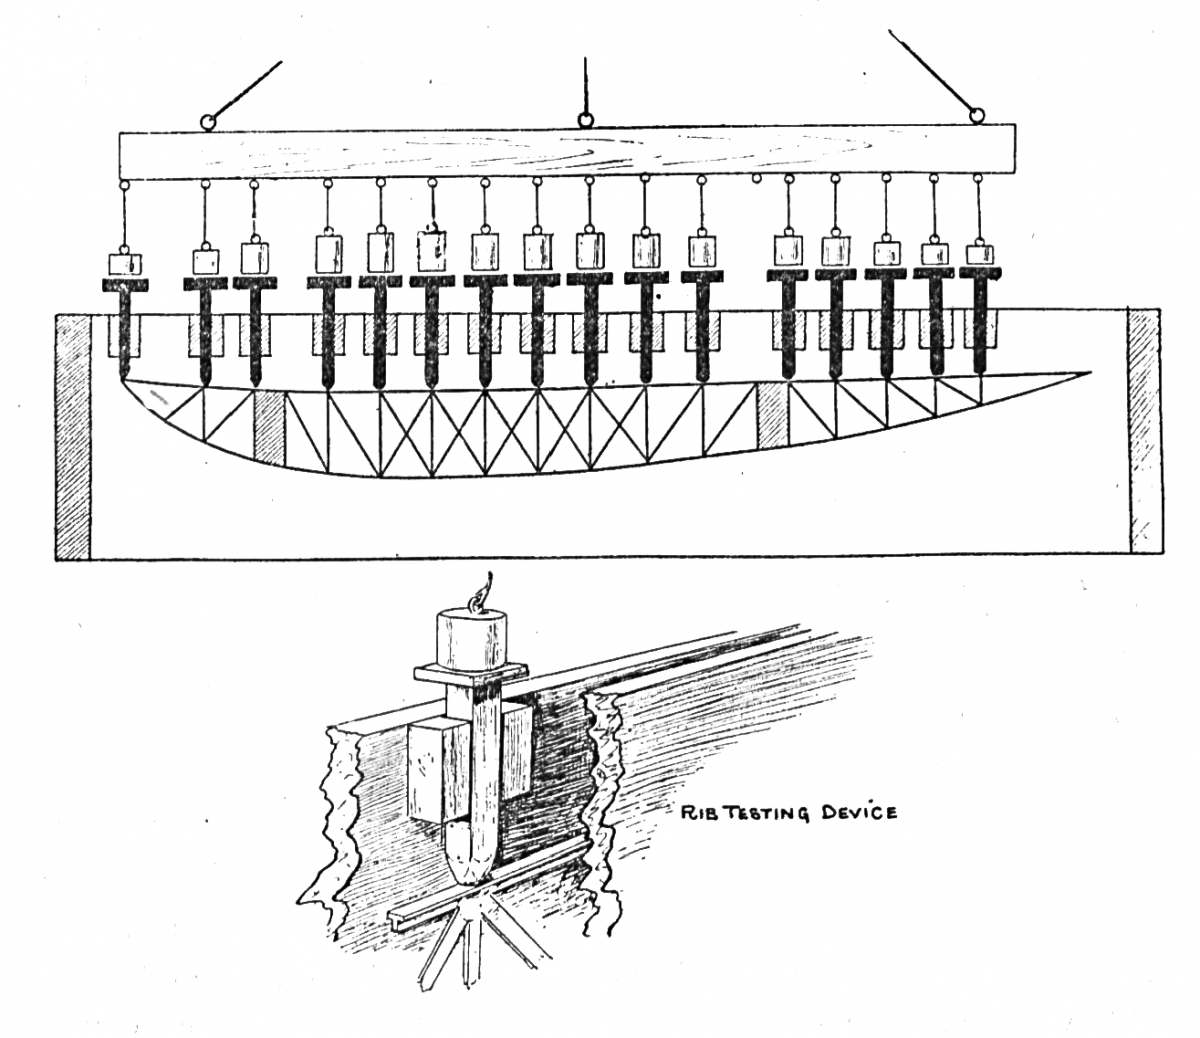 Sketch of the NC-4 wing rib testing device